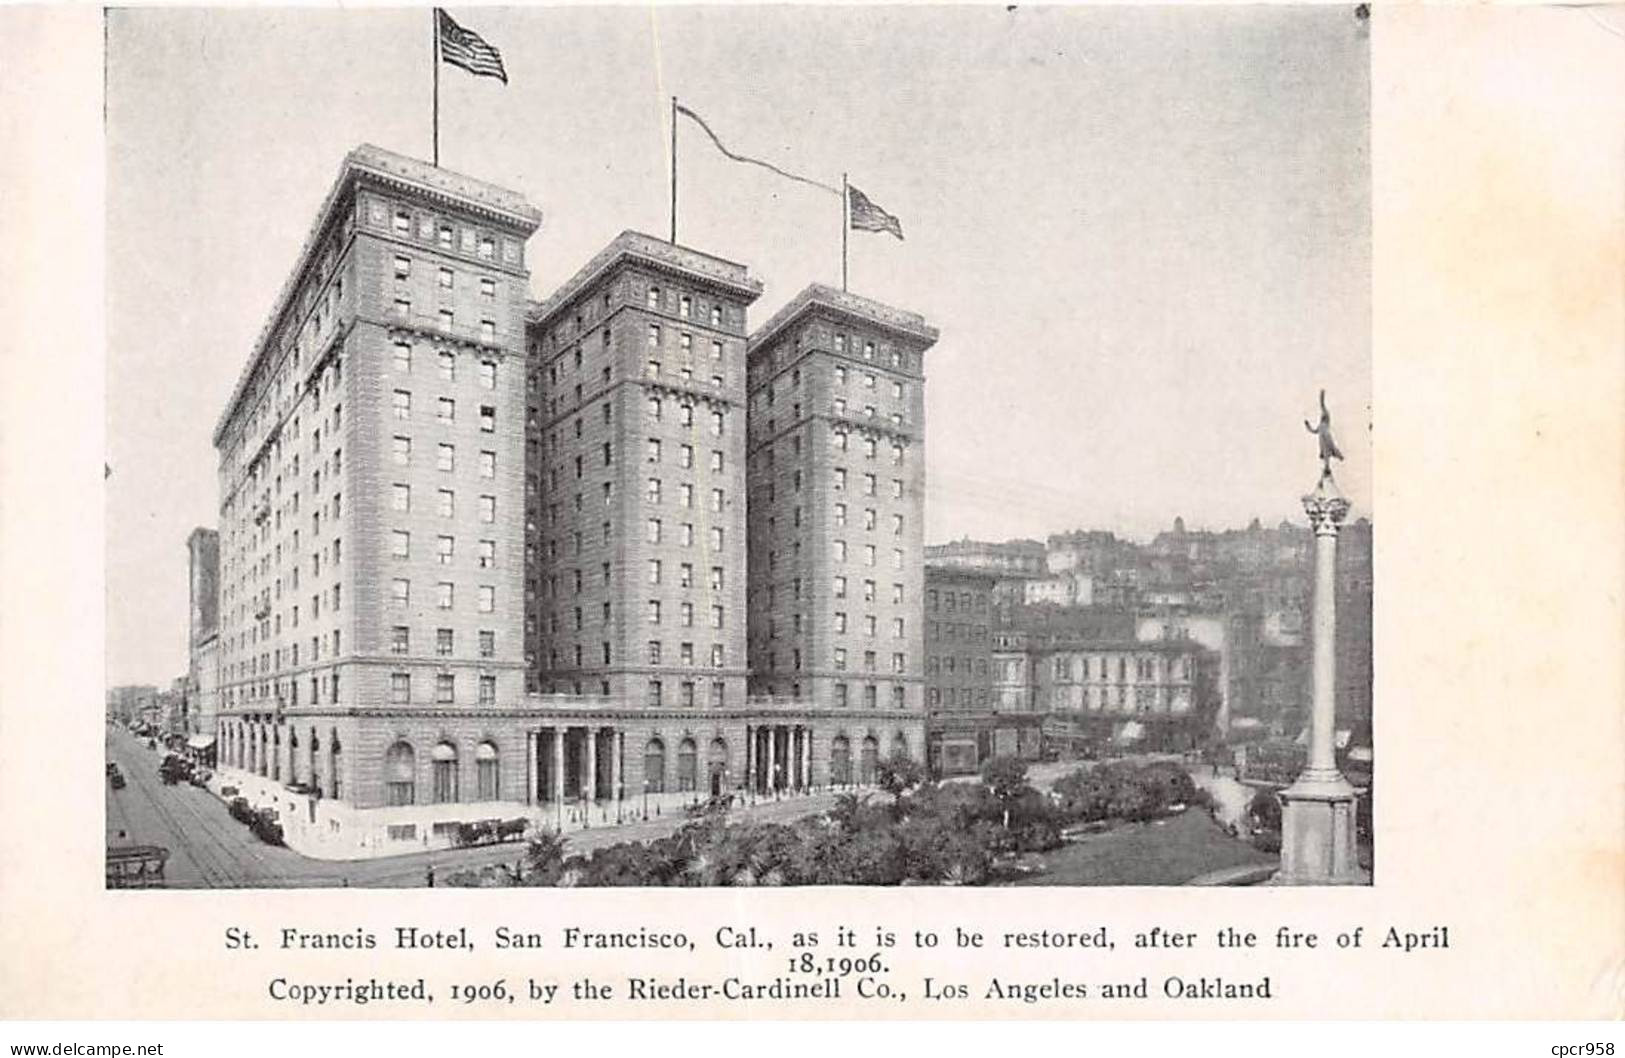 ETATS UNIS - SAN FRANCISCO - SAN39439 - St Francis Hotel - As It Is To Be Restored After The Fire Of April 18, 1906 - San Francisco